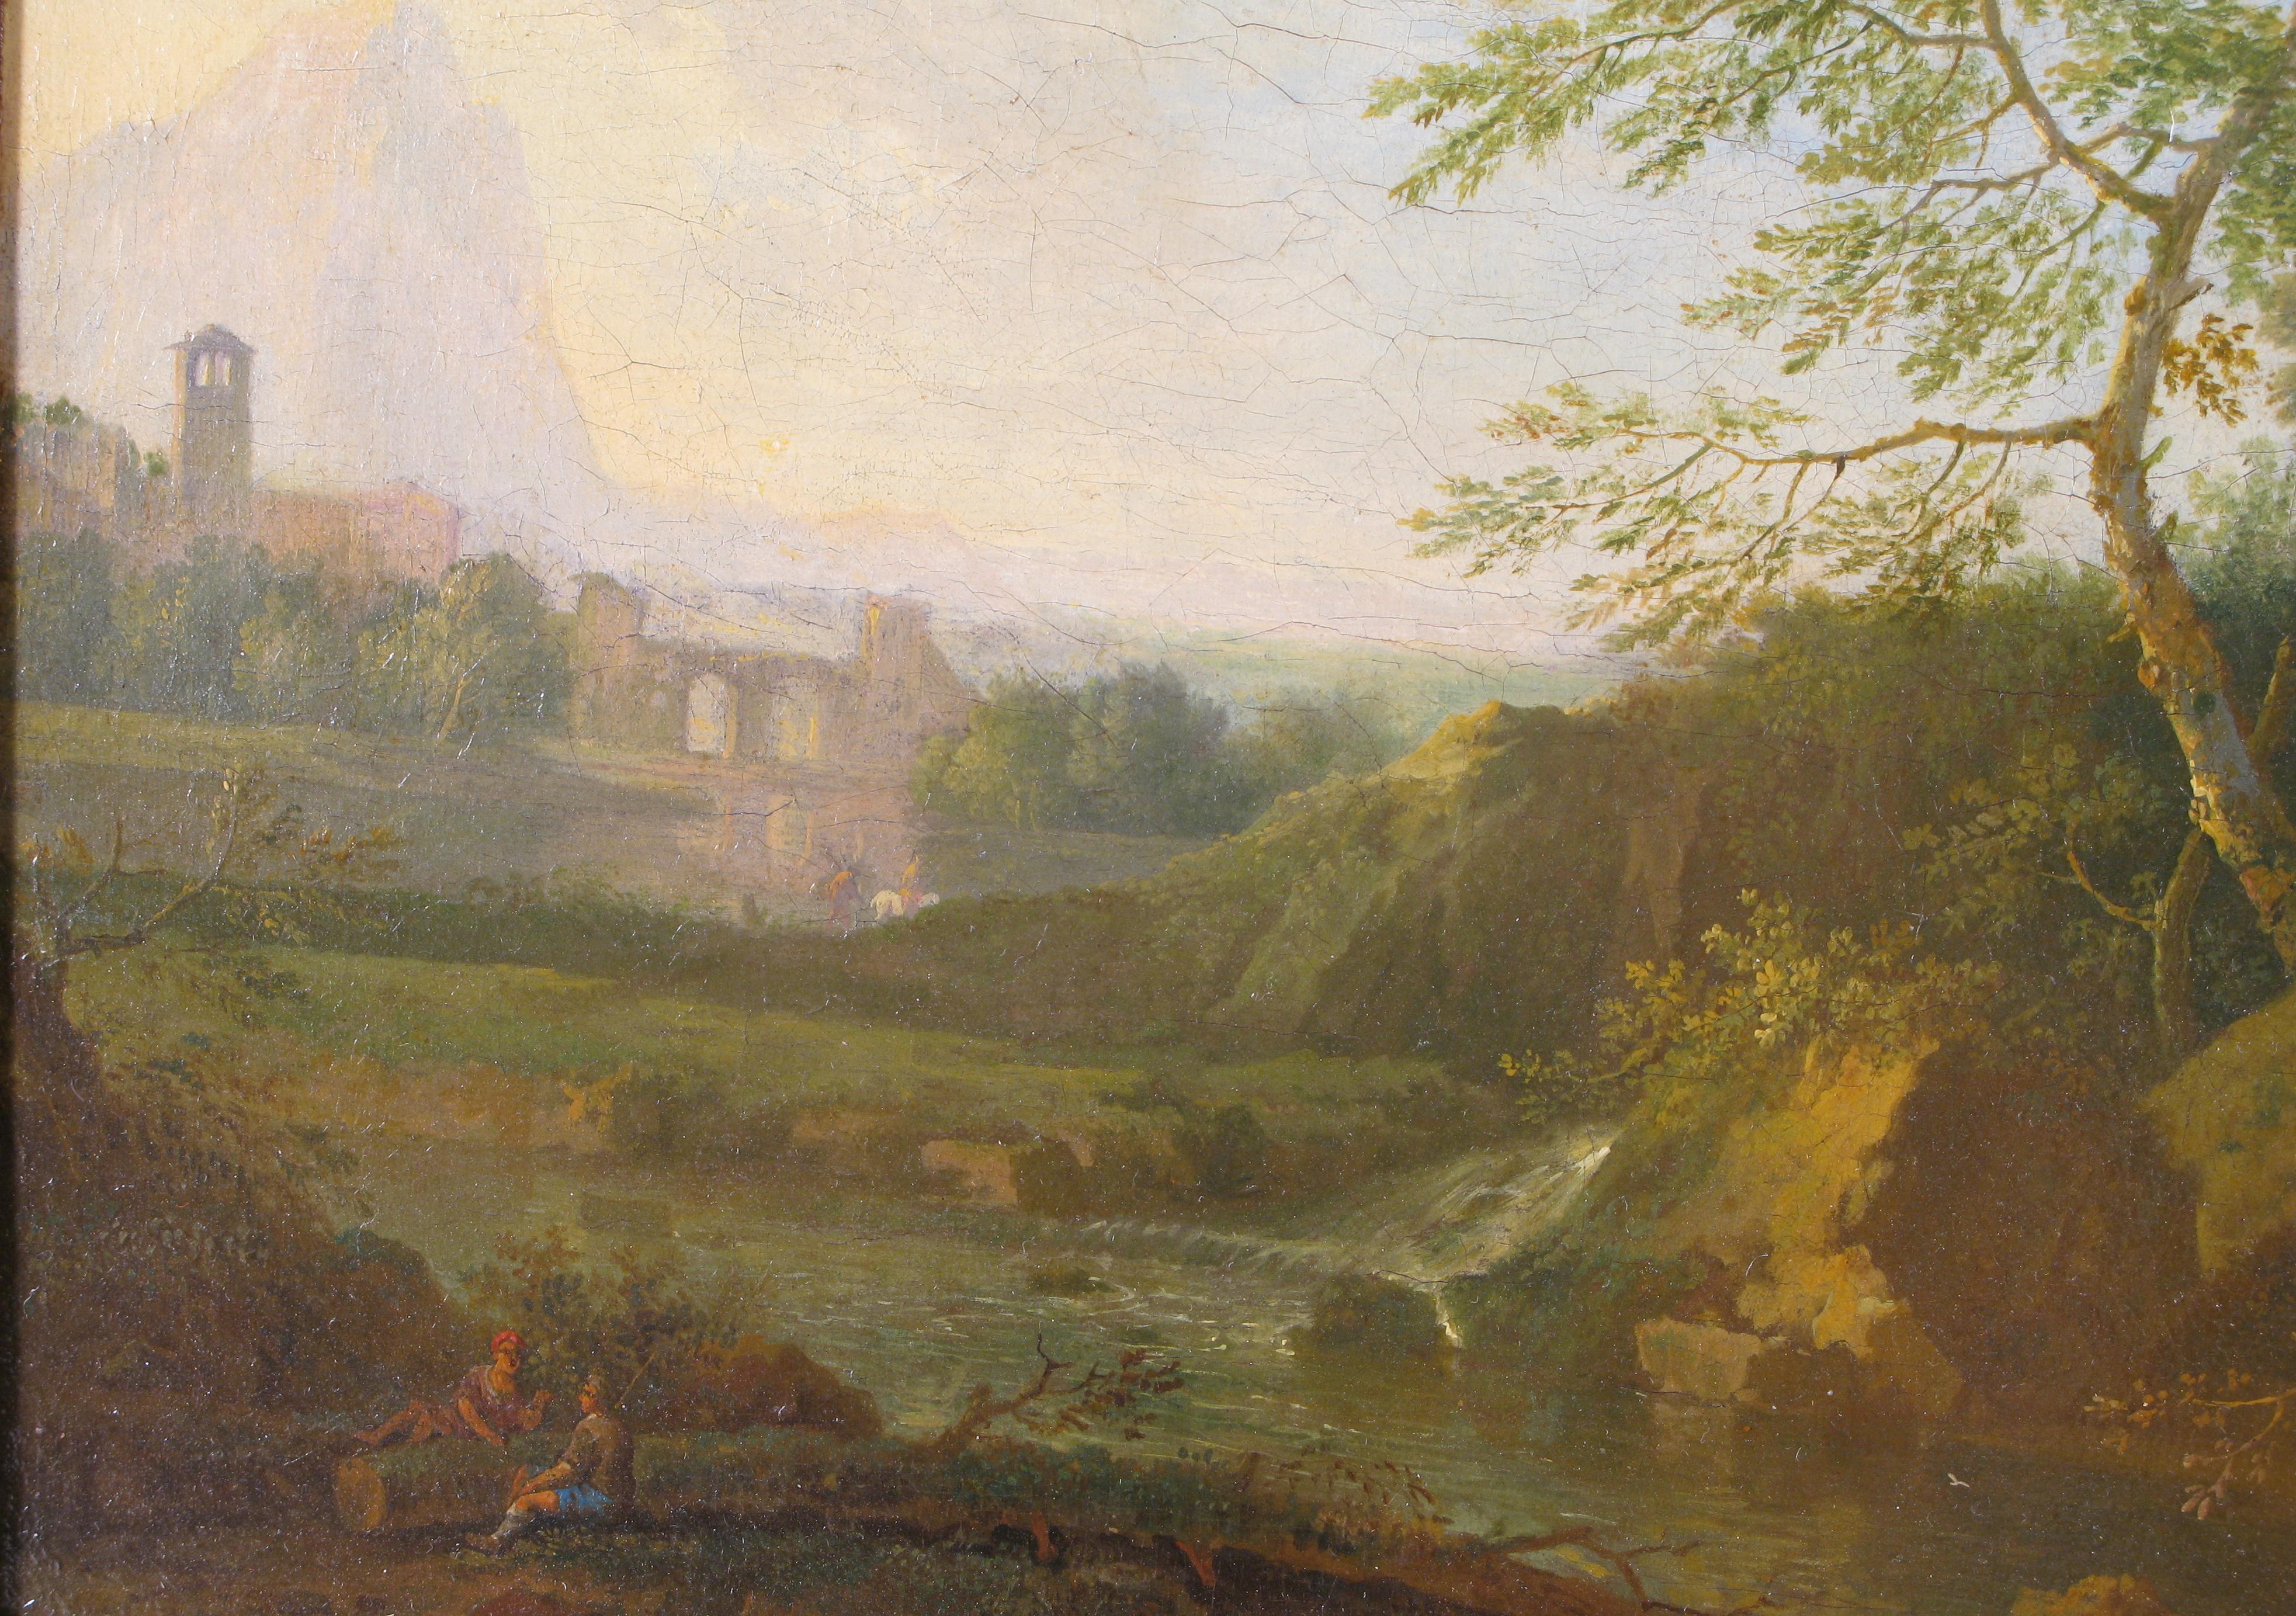 Painted Grand Tour, Landscape of the Roman Countryside with Architecture and Characters For Sale